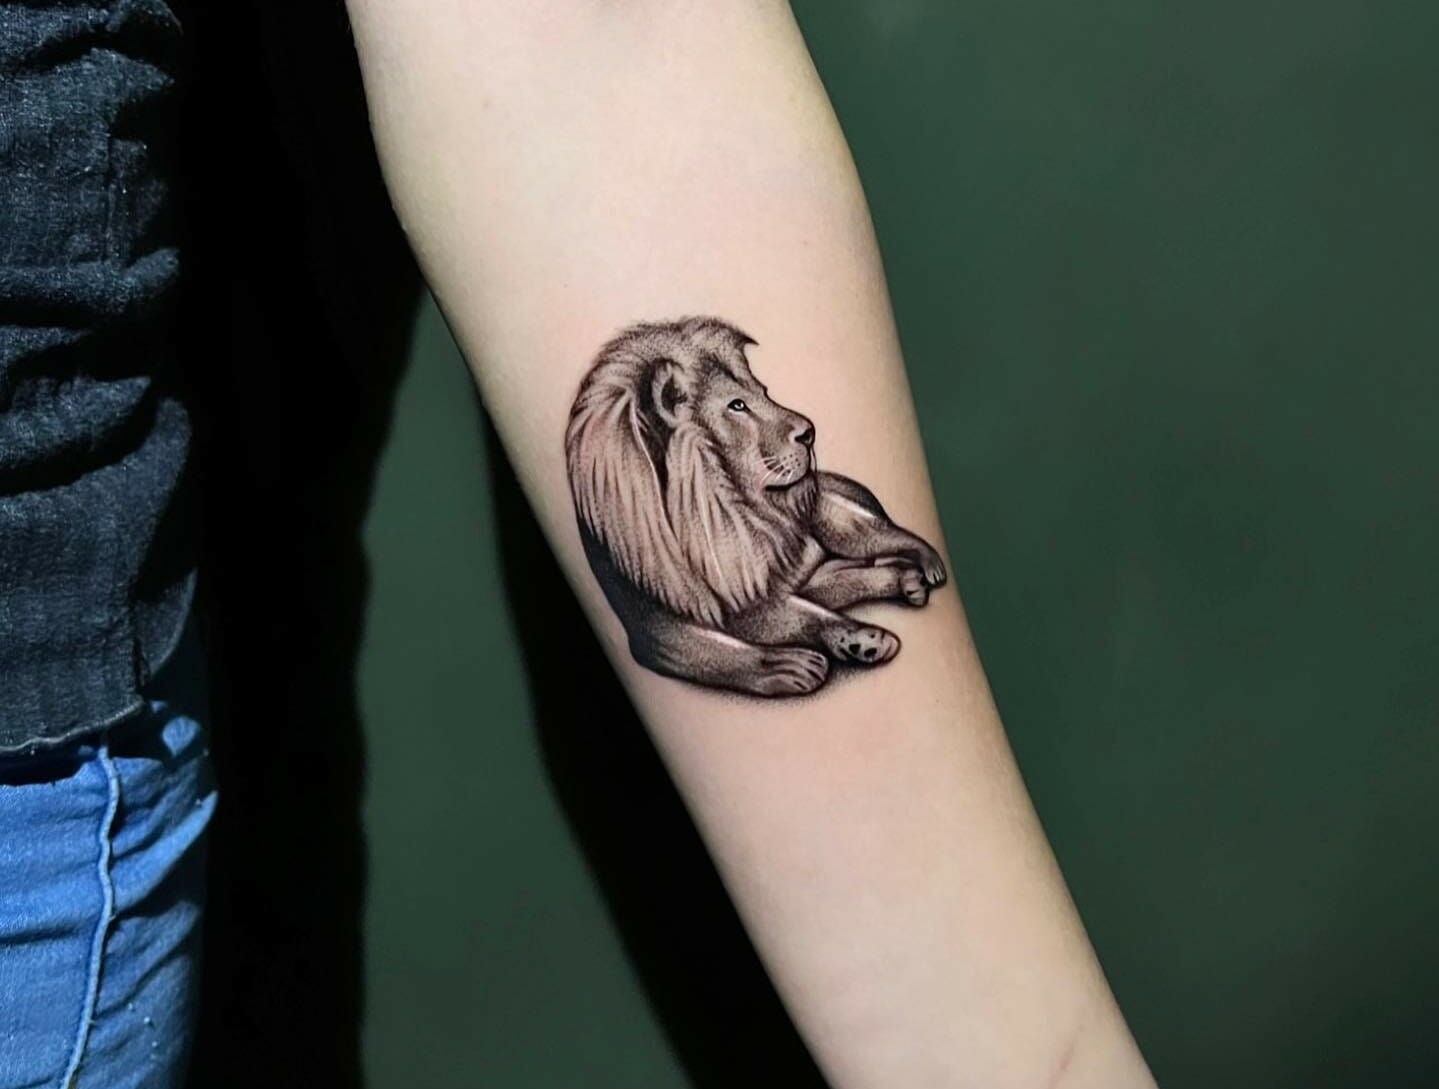 15 Exceptional Arm Tattoo Designs Suitable for Everyone